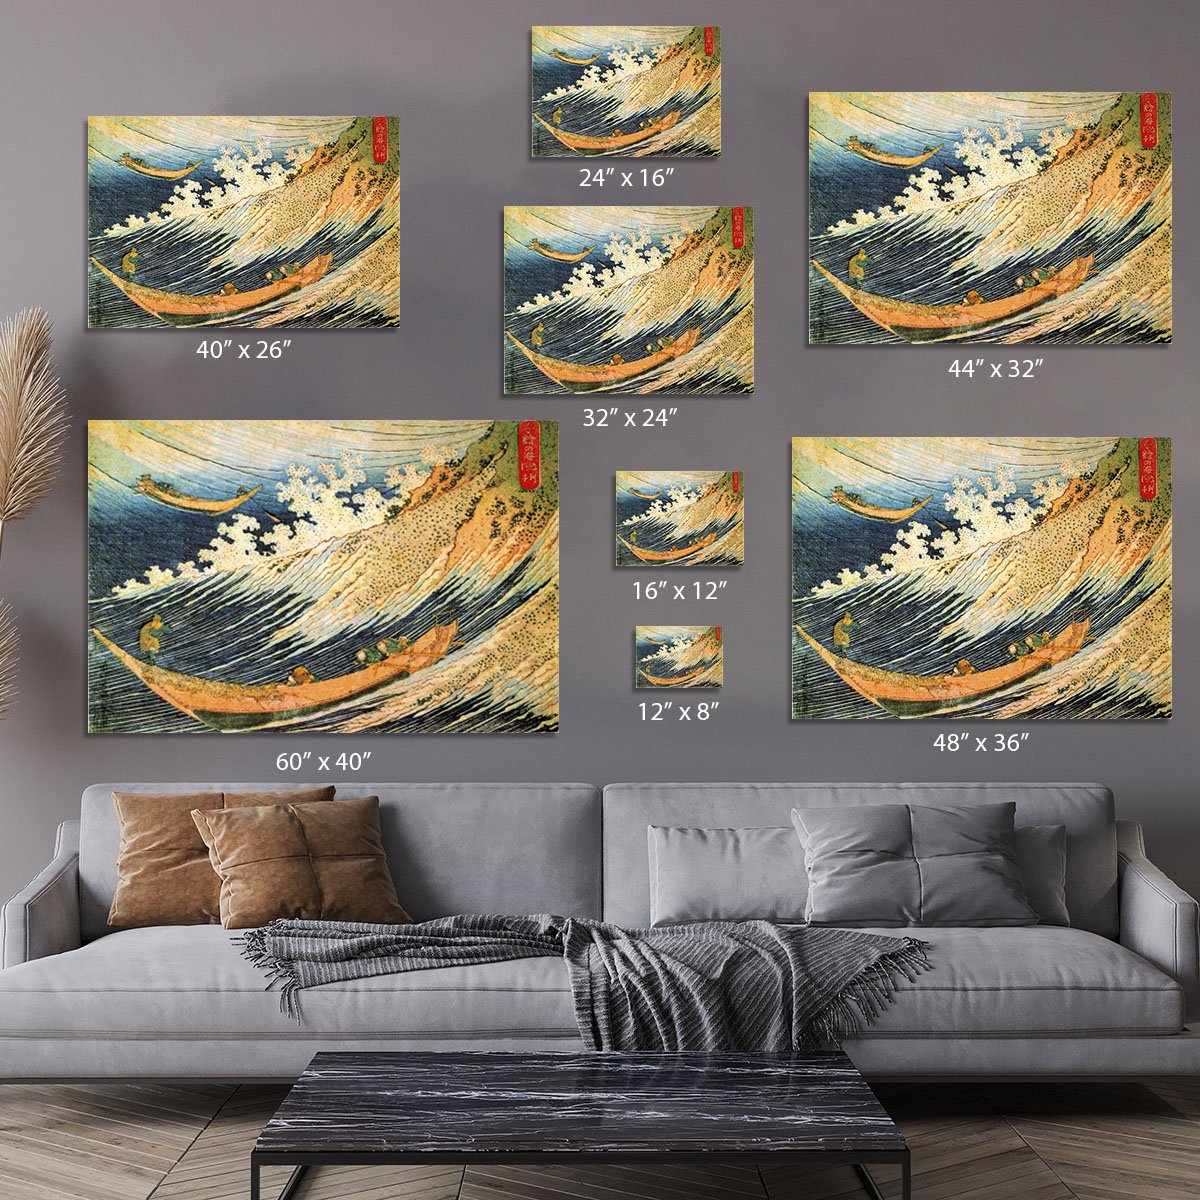 Ocean landscape 2 by Hokusai Canvas Print or Poster